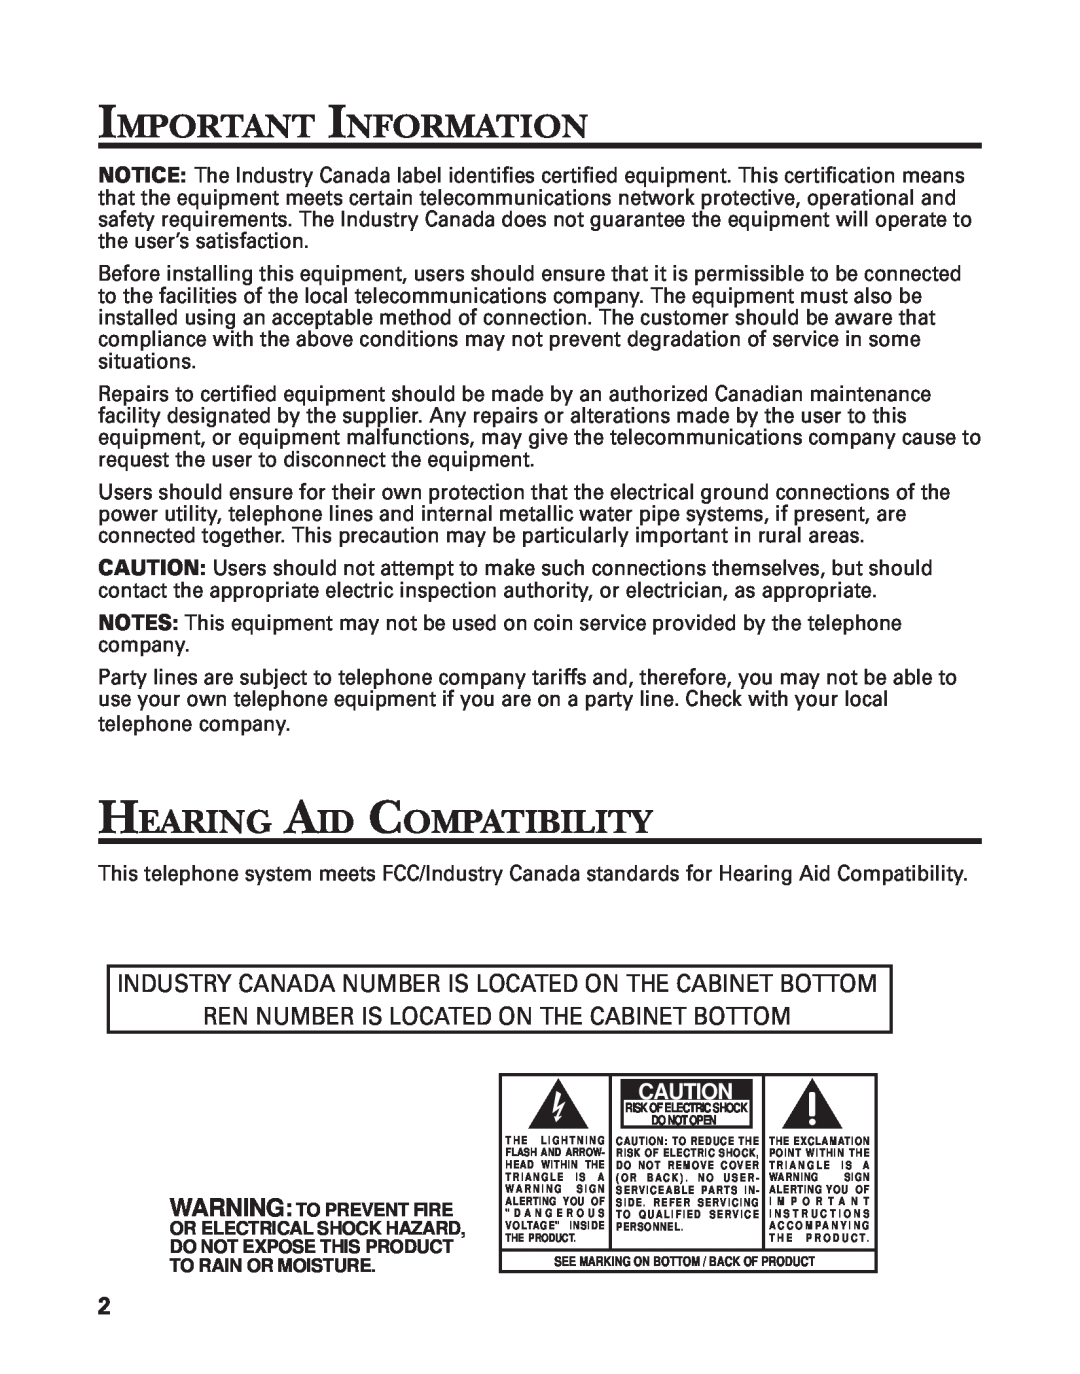 GE 2-9772 manual Important Information, Hearing Aid Compatibility, Industry Canada Number Is Located On The Cabinet Bottom 